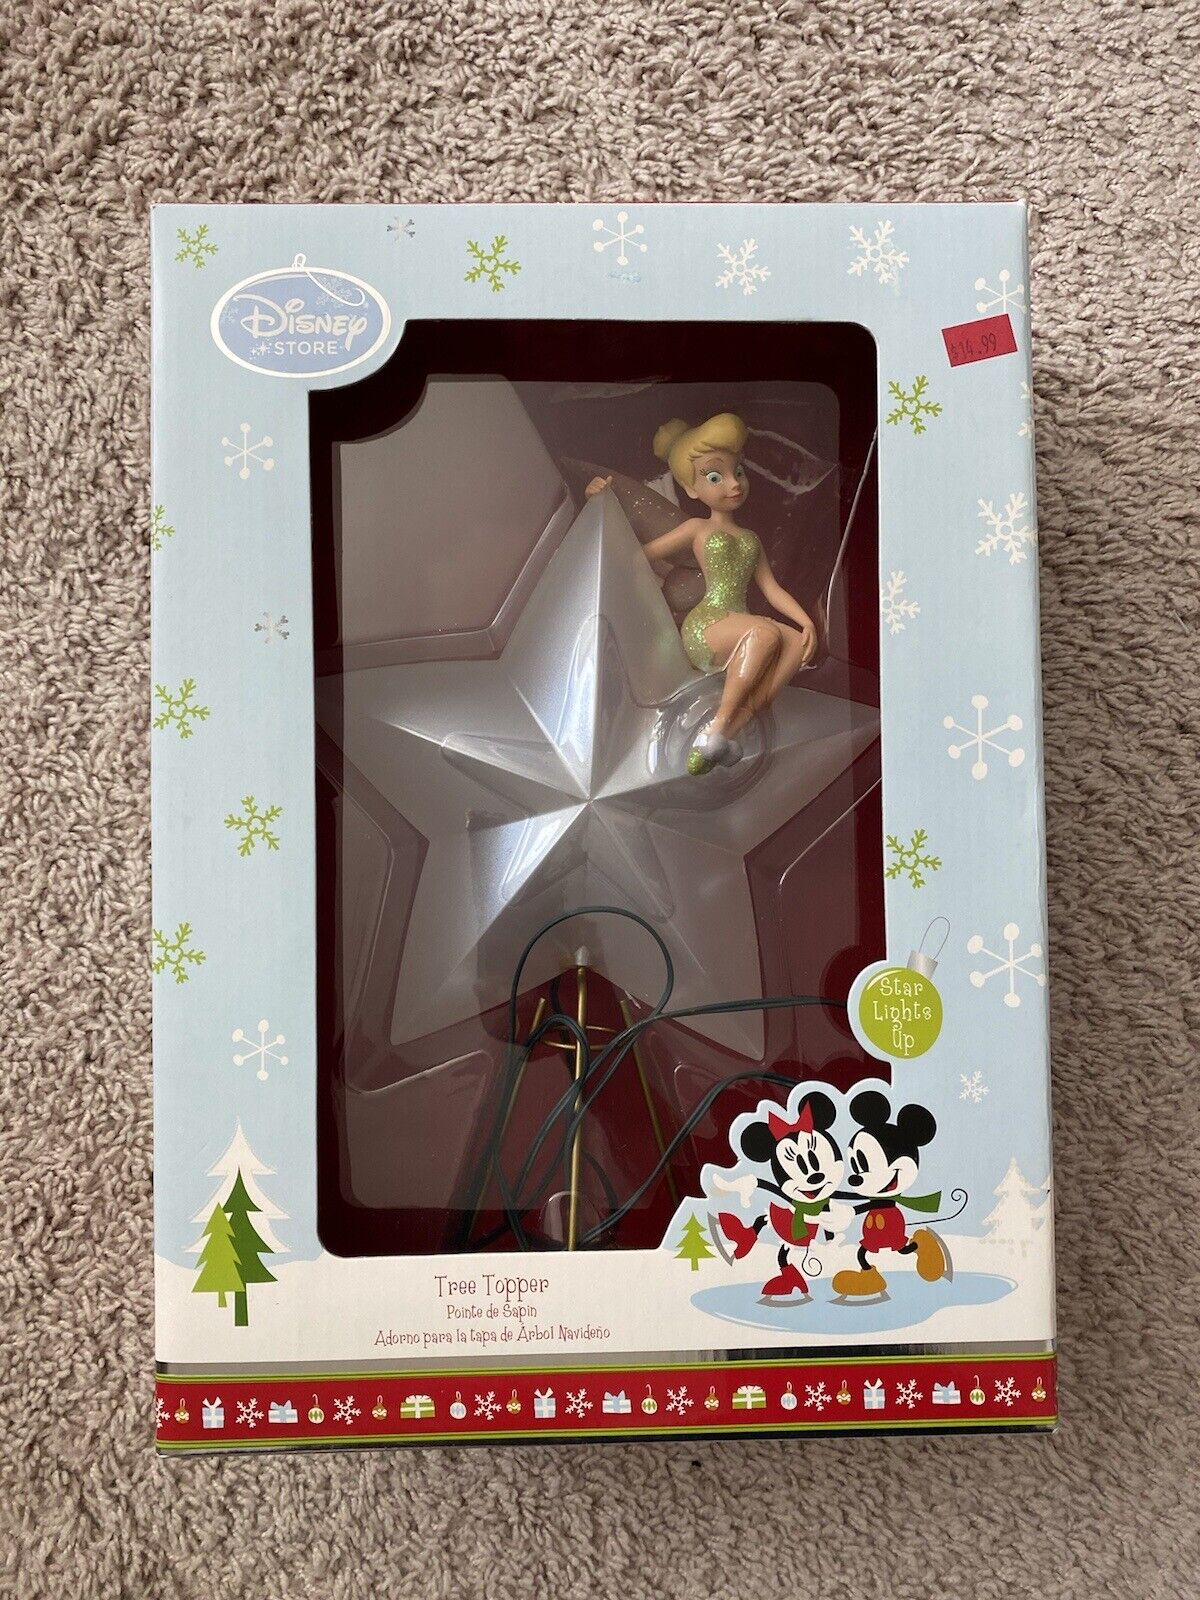 GENTLY USED Disney Store Tinker Bell Christmas Tree Topper, Battery Operated